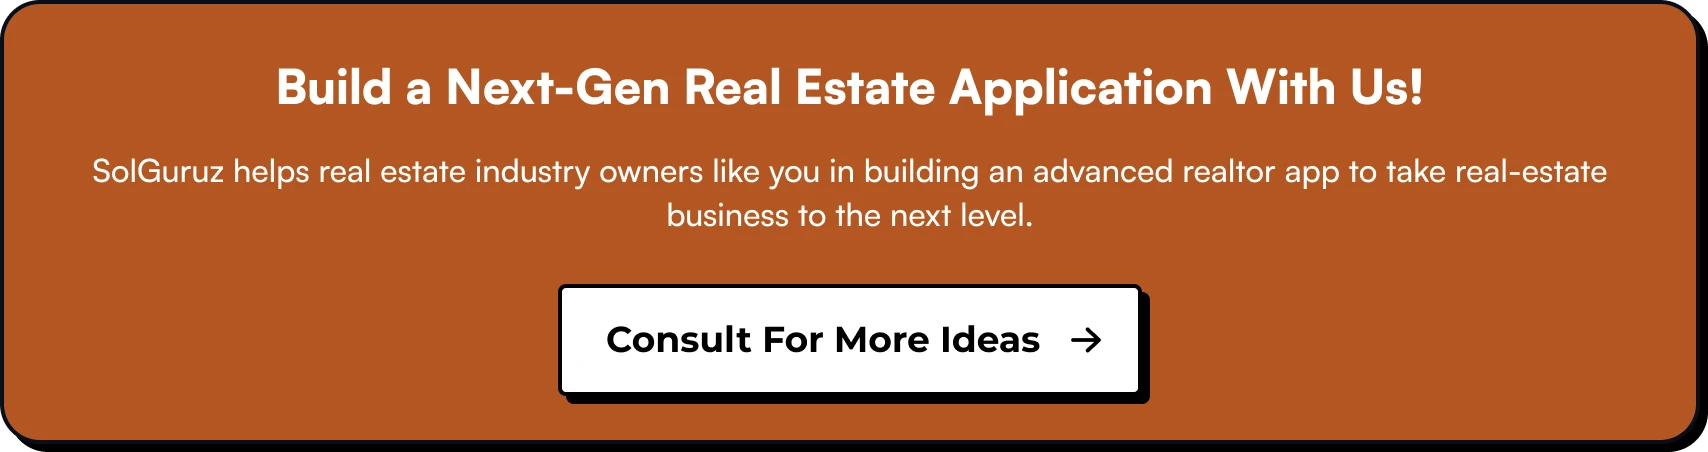 Build a Next-Gen Real Estate Application With Us!